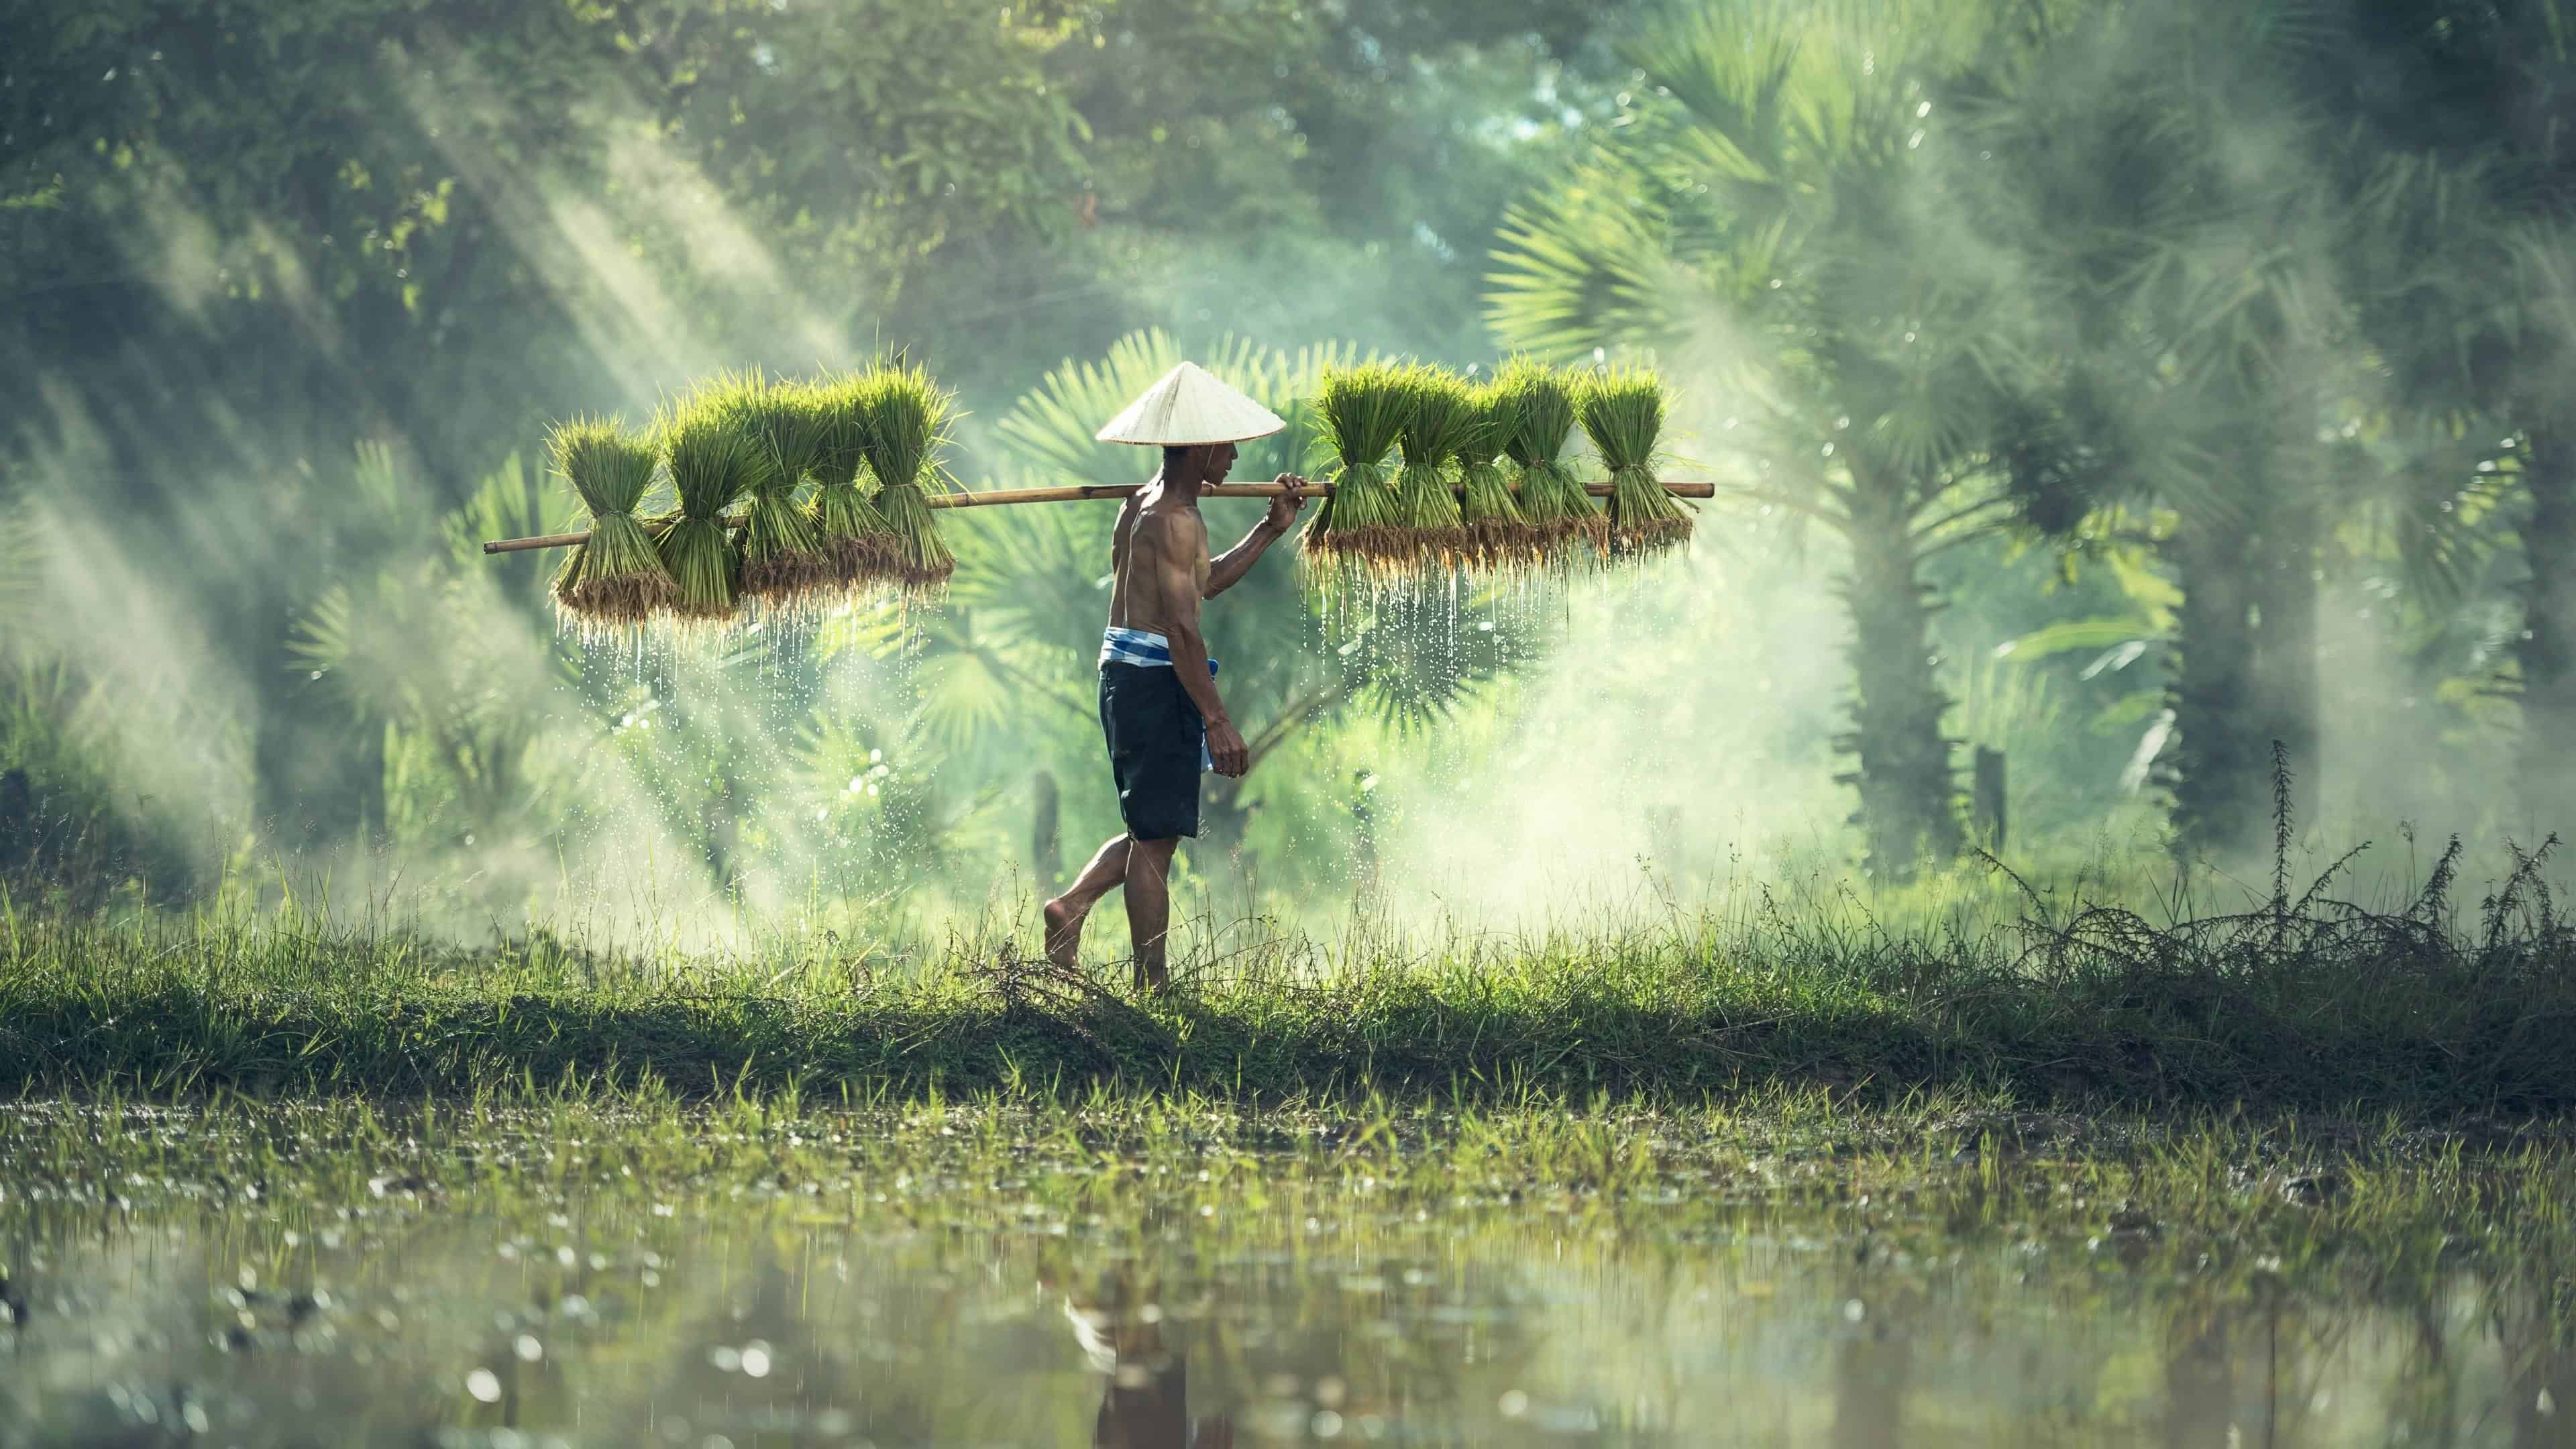 Cambodia, Rice farming, Rural life, Connection with nature, 3840x2160 4K Desktop